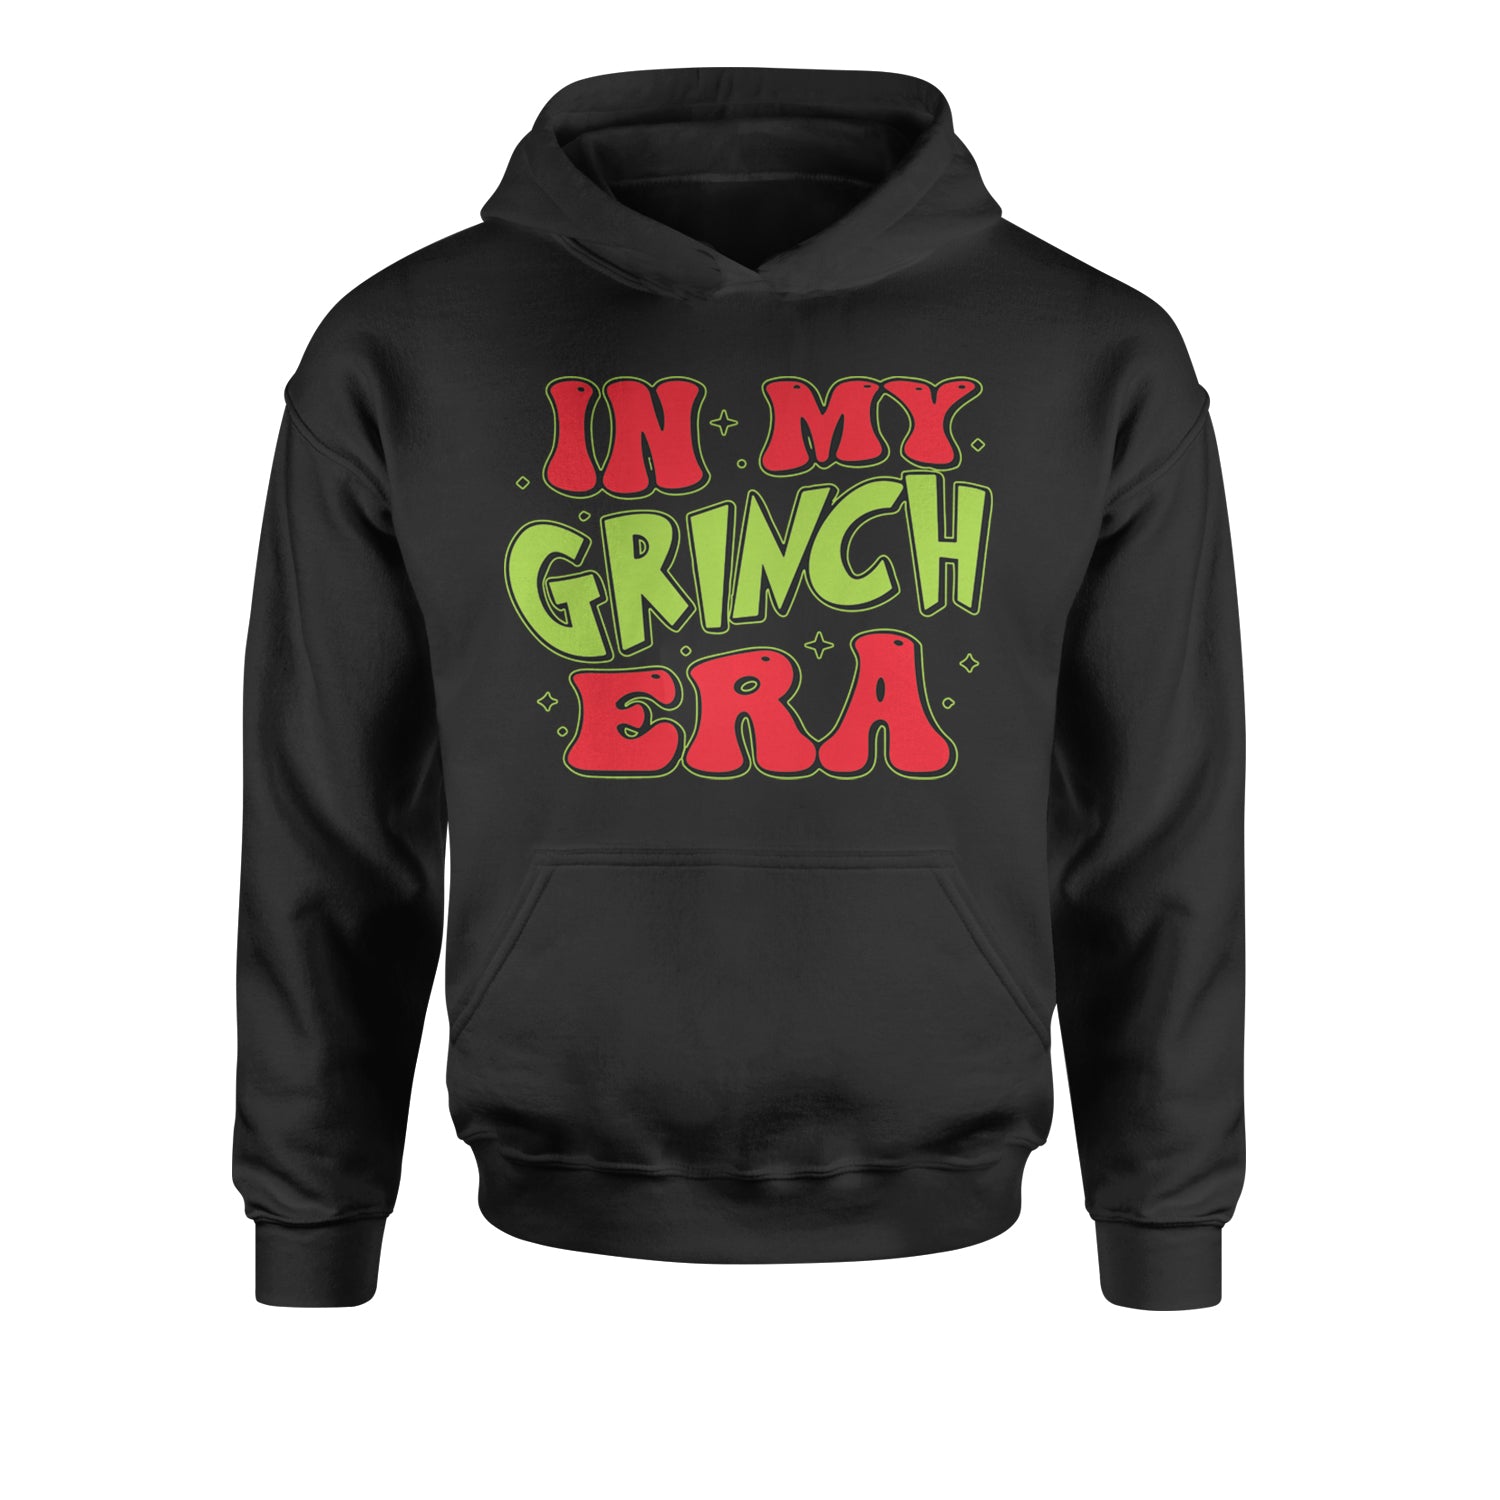 In My Gr-nch Era Jolly Merry Christmas Youth-Sized Hoodie